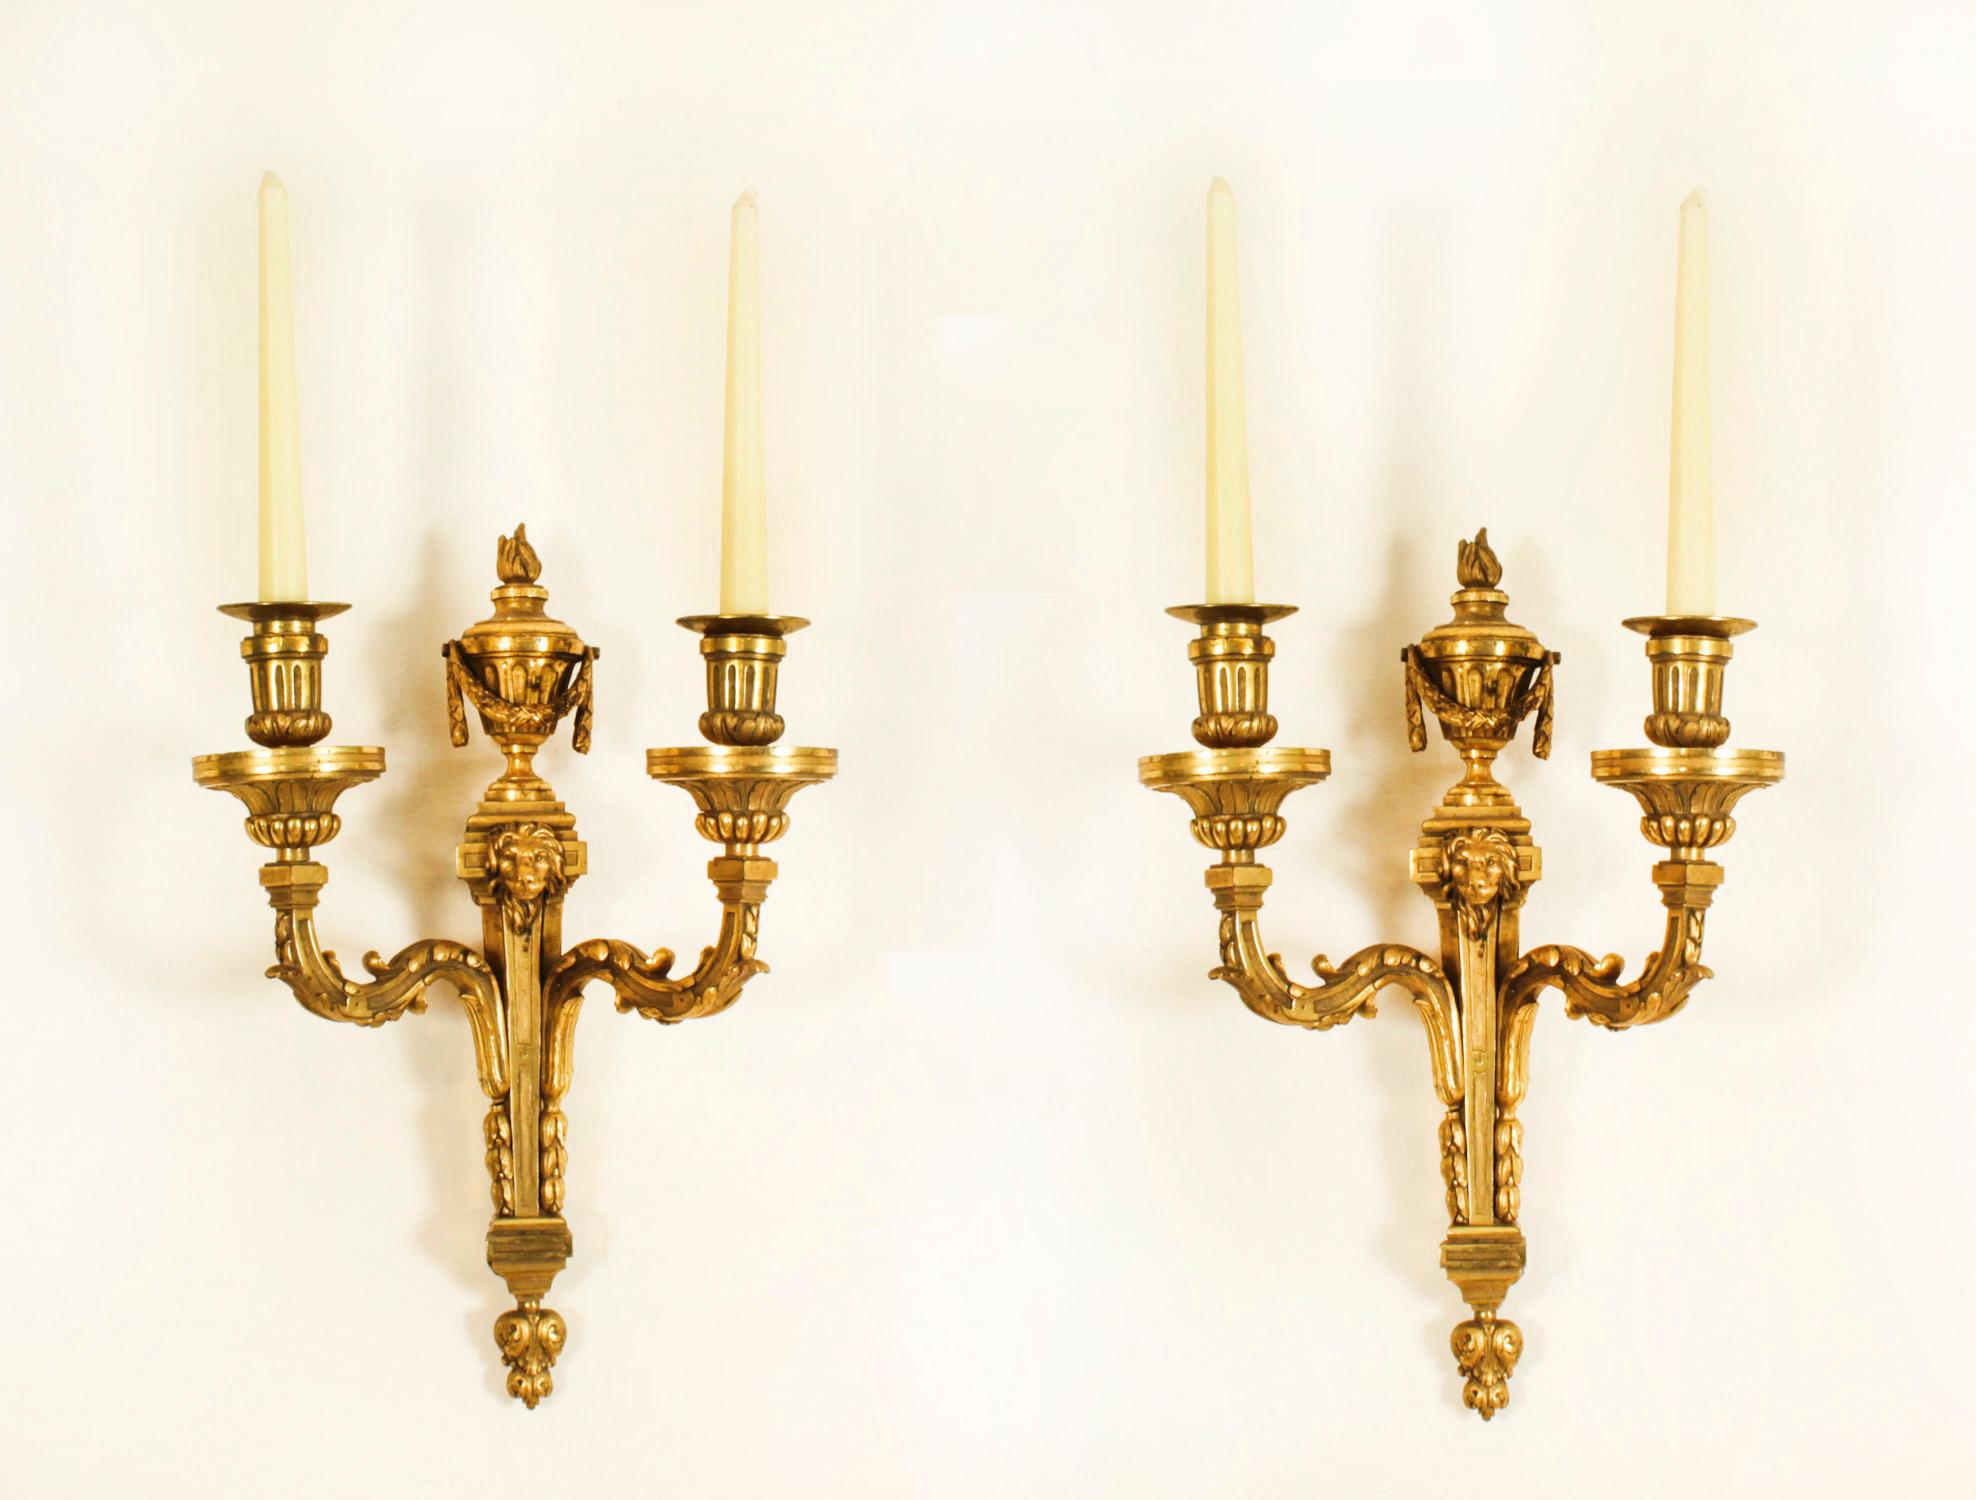 Antique Pair Regency Revival Ormolu Wall Lights Appliques Mid 19th Century For Sale 9